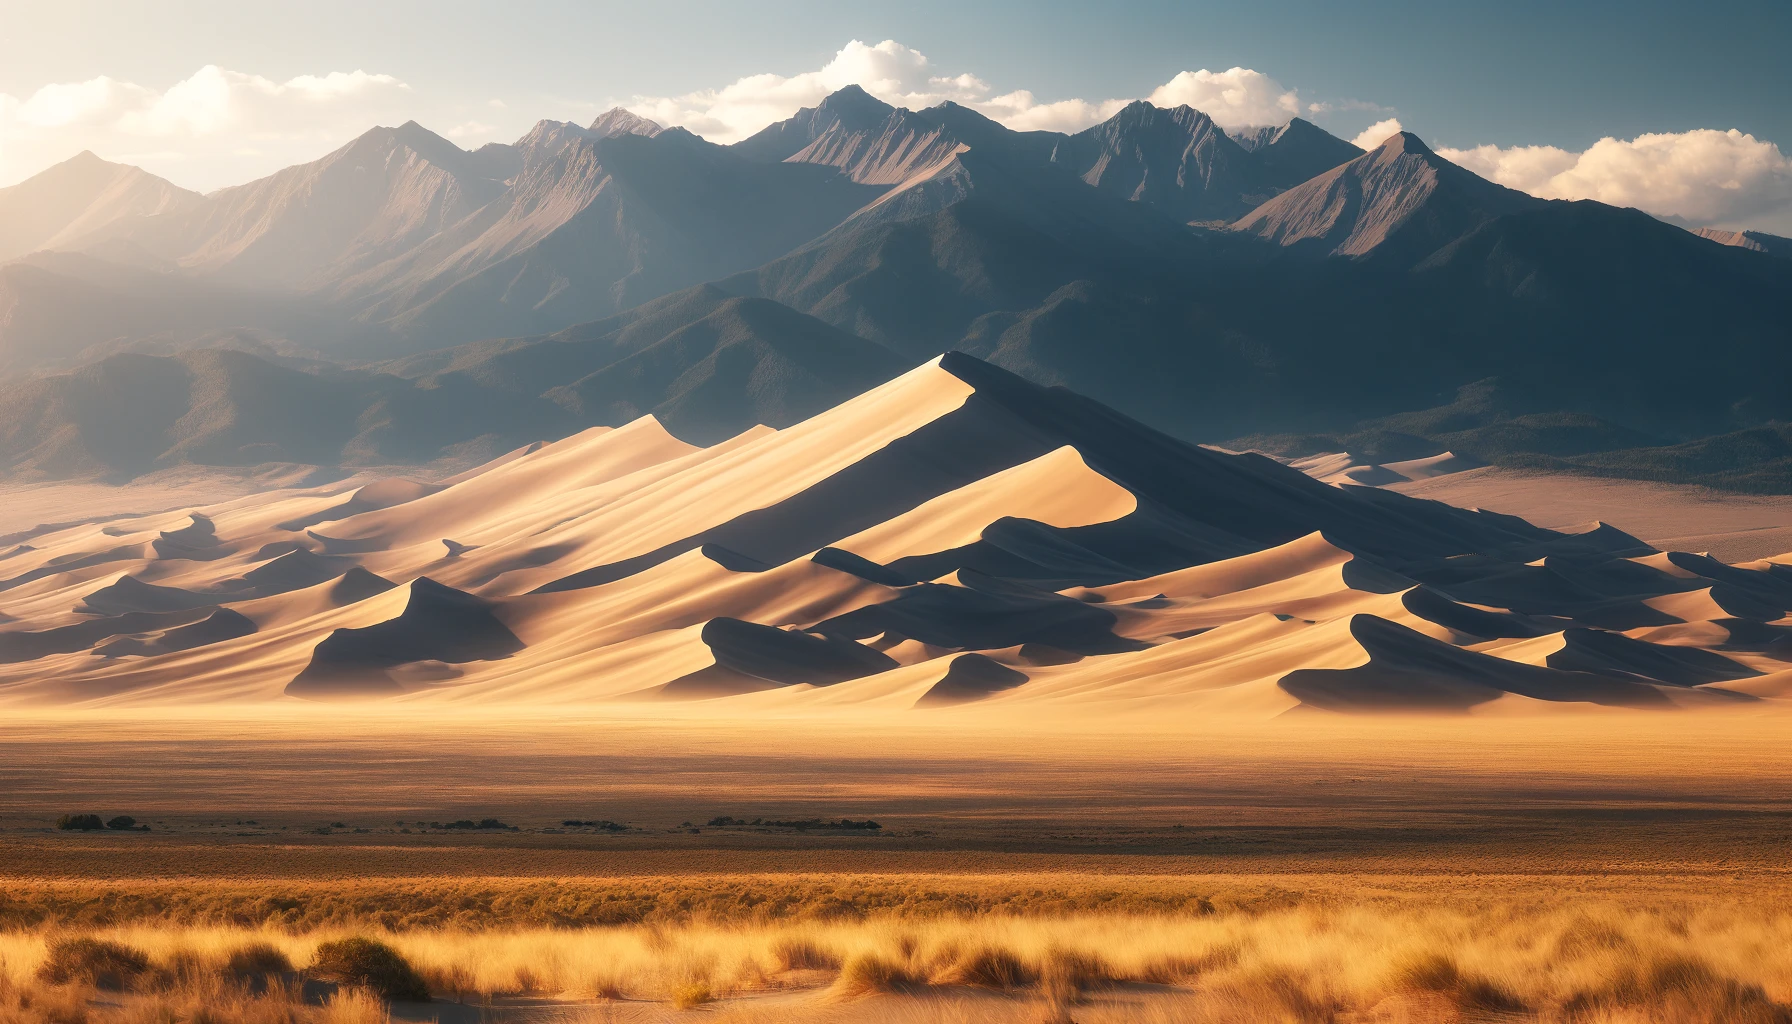 A Summer Vacation to the Great Sand Dunes